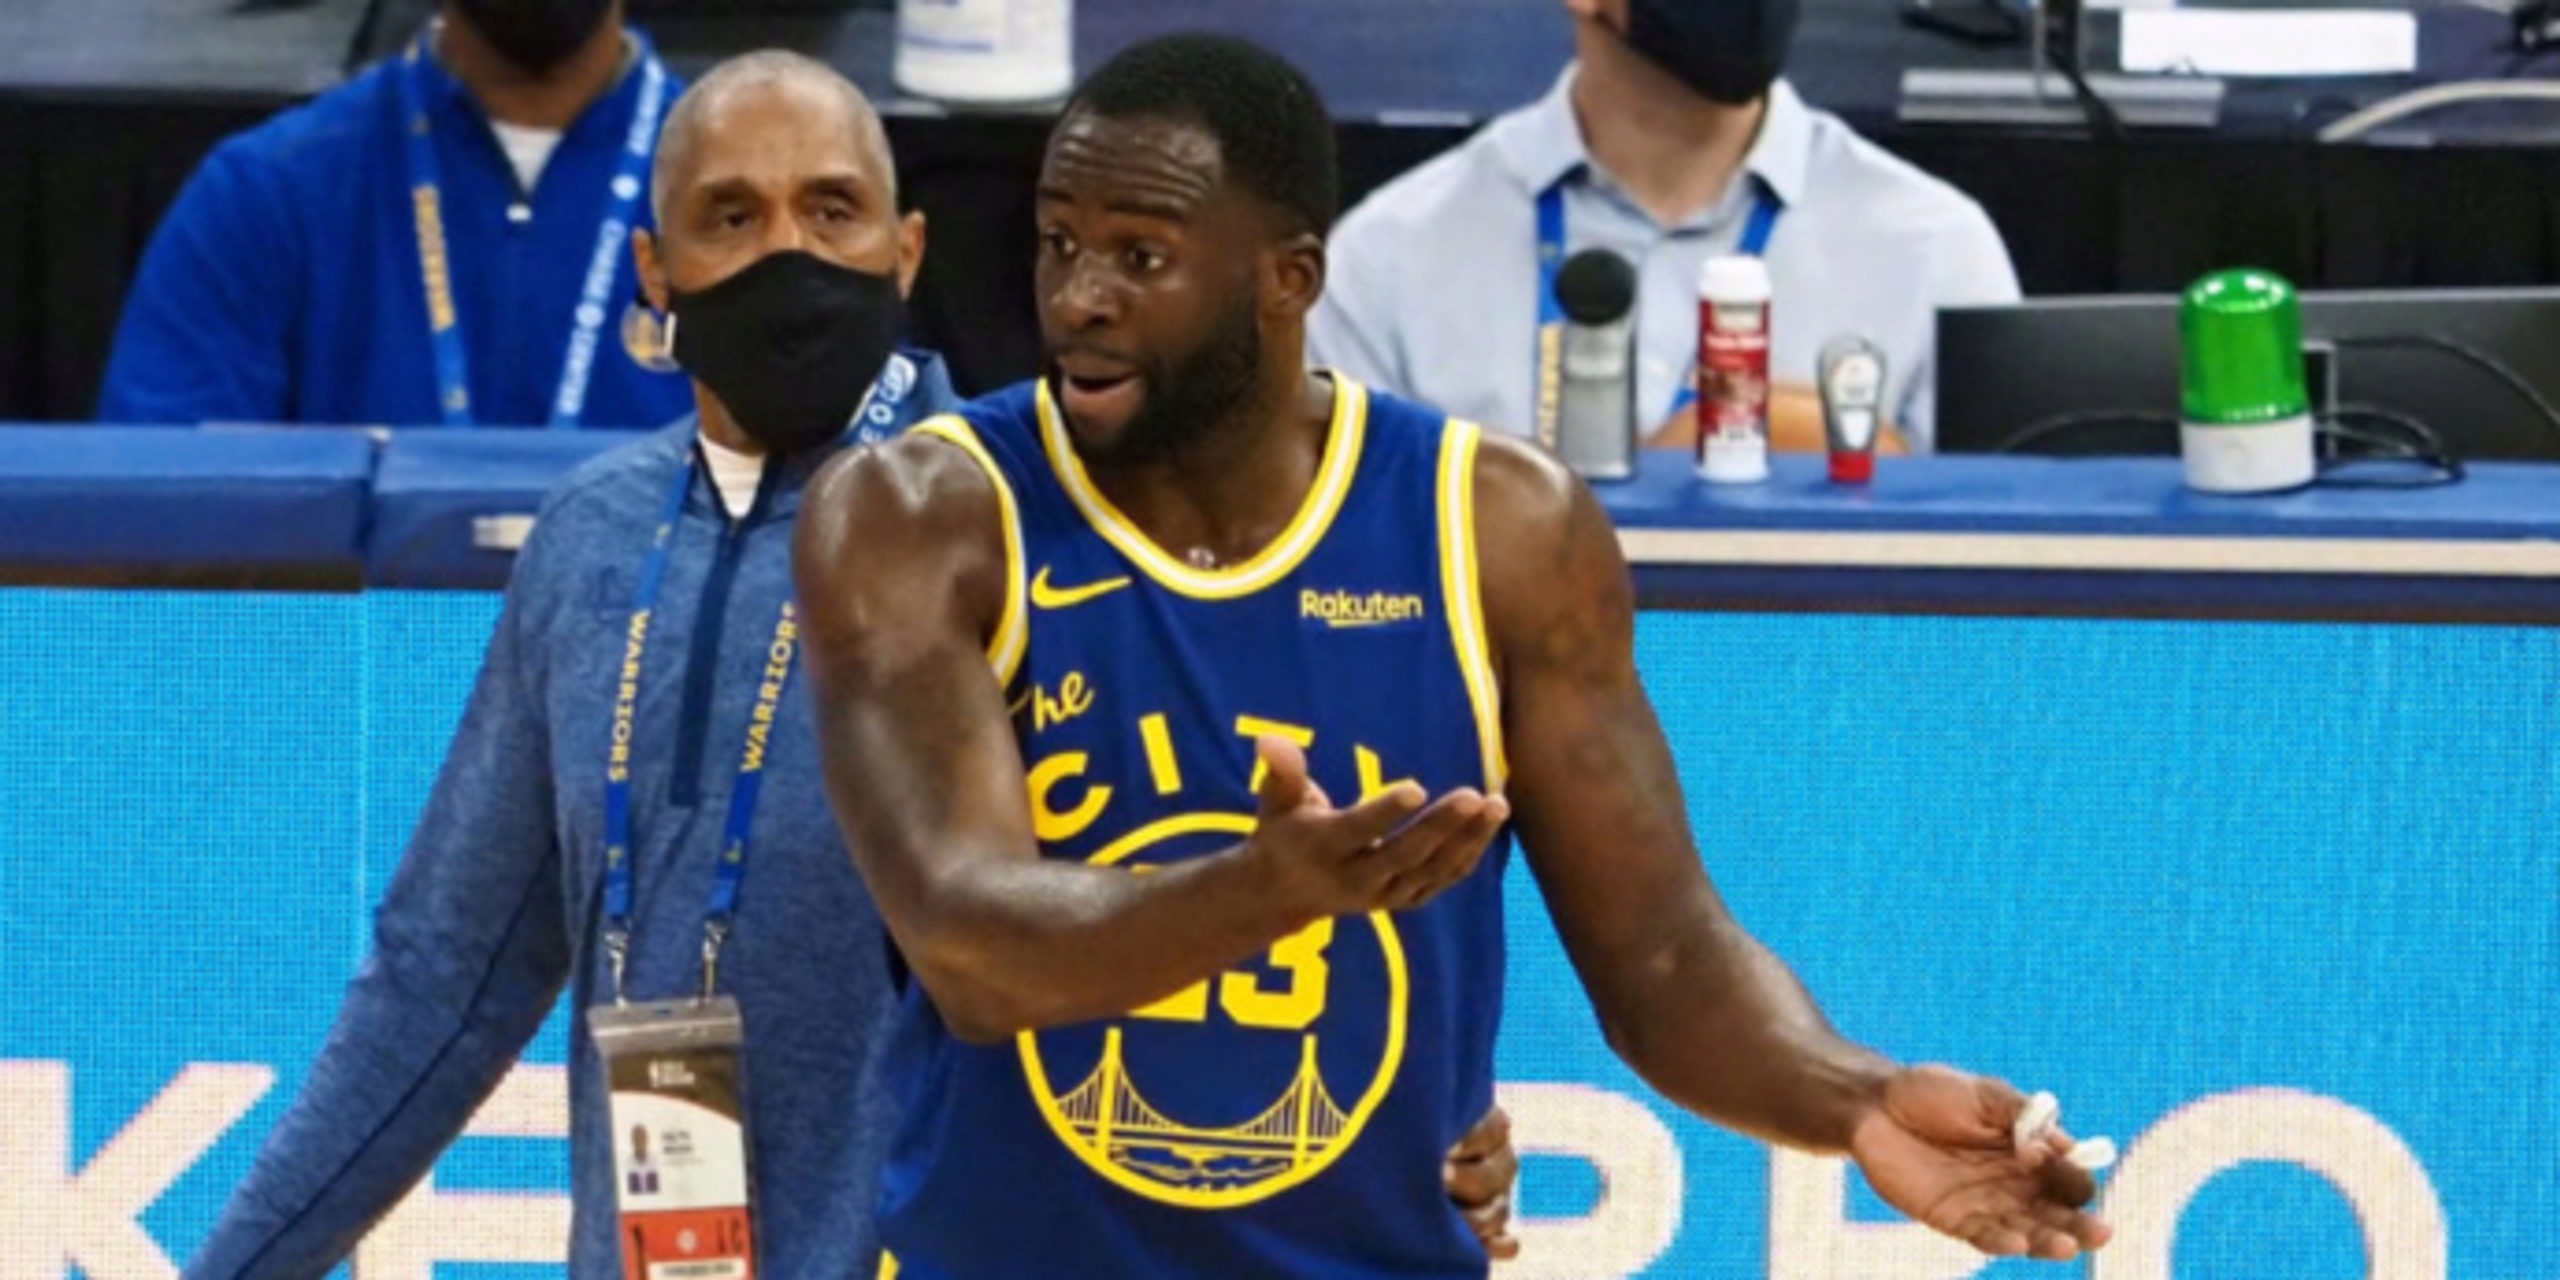 Did Draymond Green set himself up for NBPA office following rant?